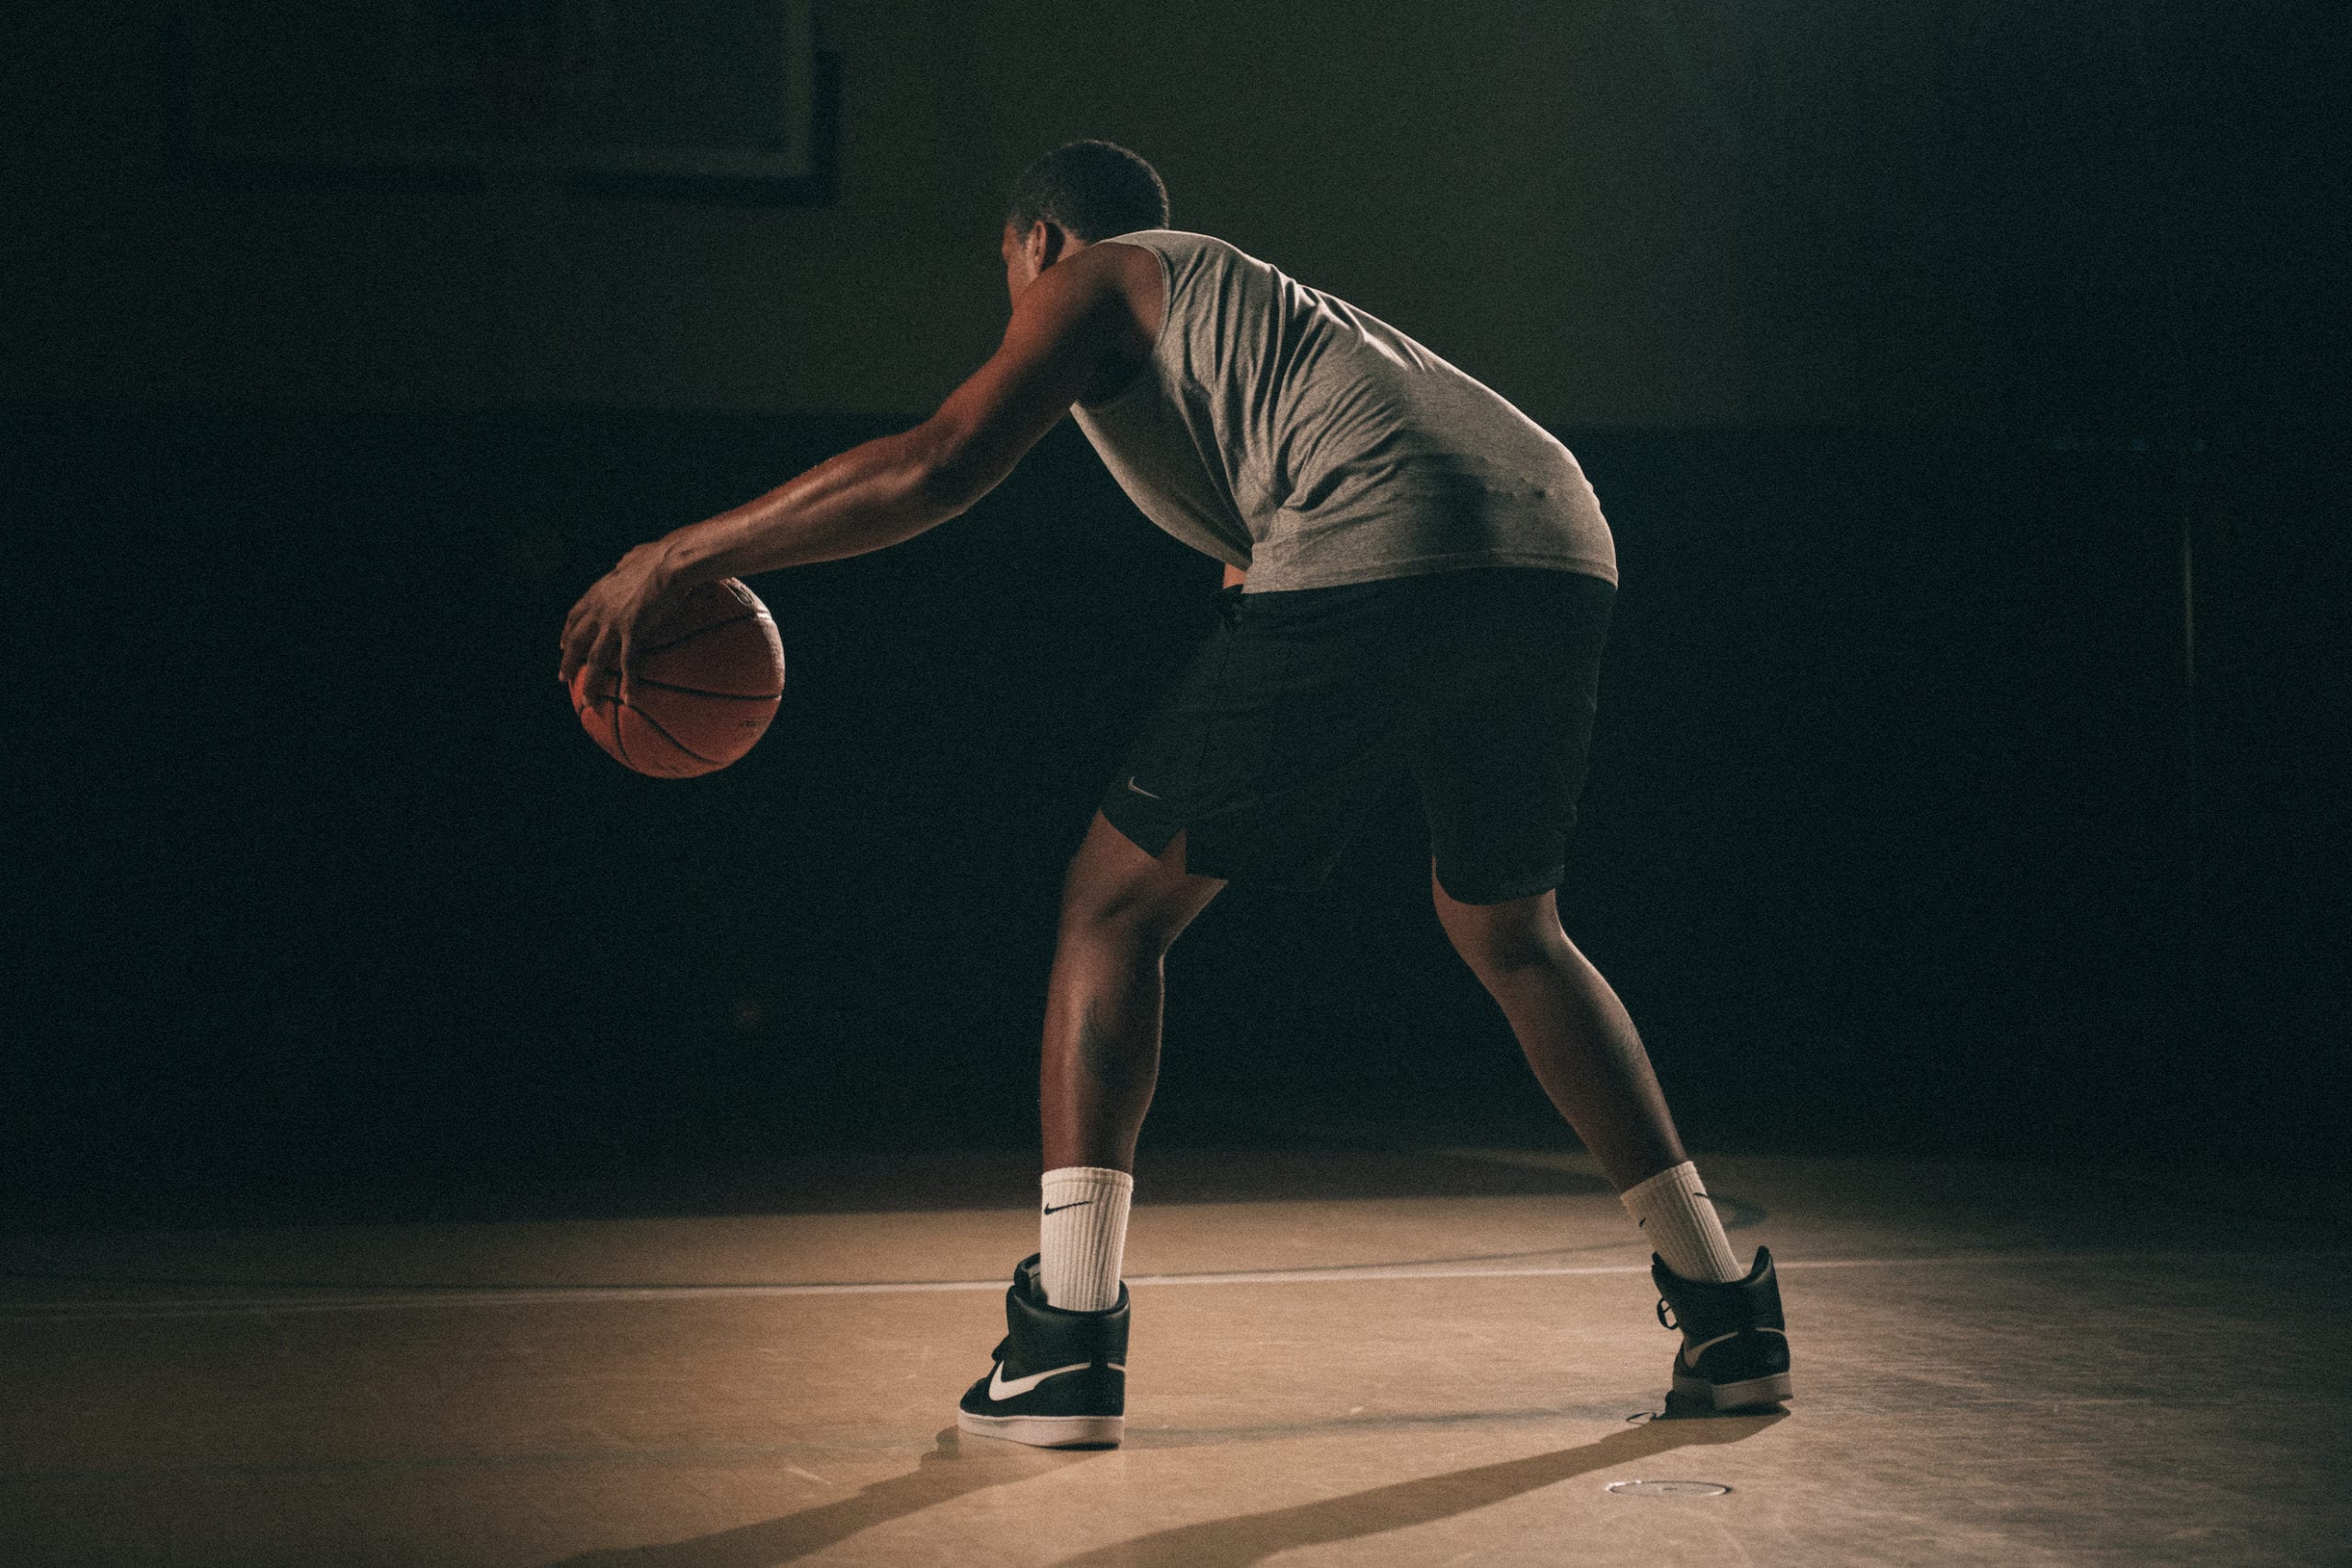 Nike Creative Marketing Concepts View from behind of an African American man poised holding a basketball on a basketball court with a light shining on him in semi darkness